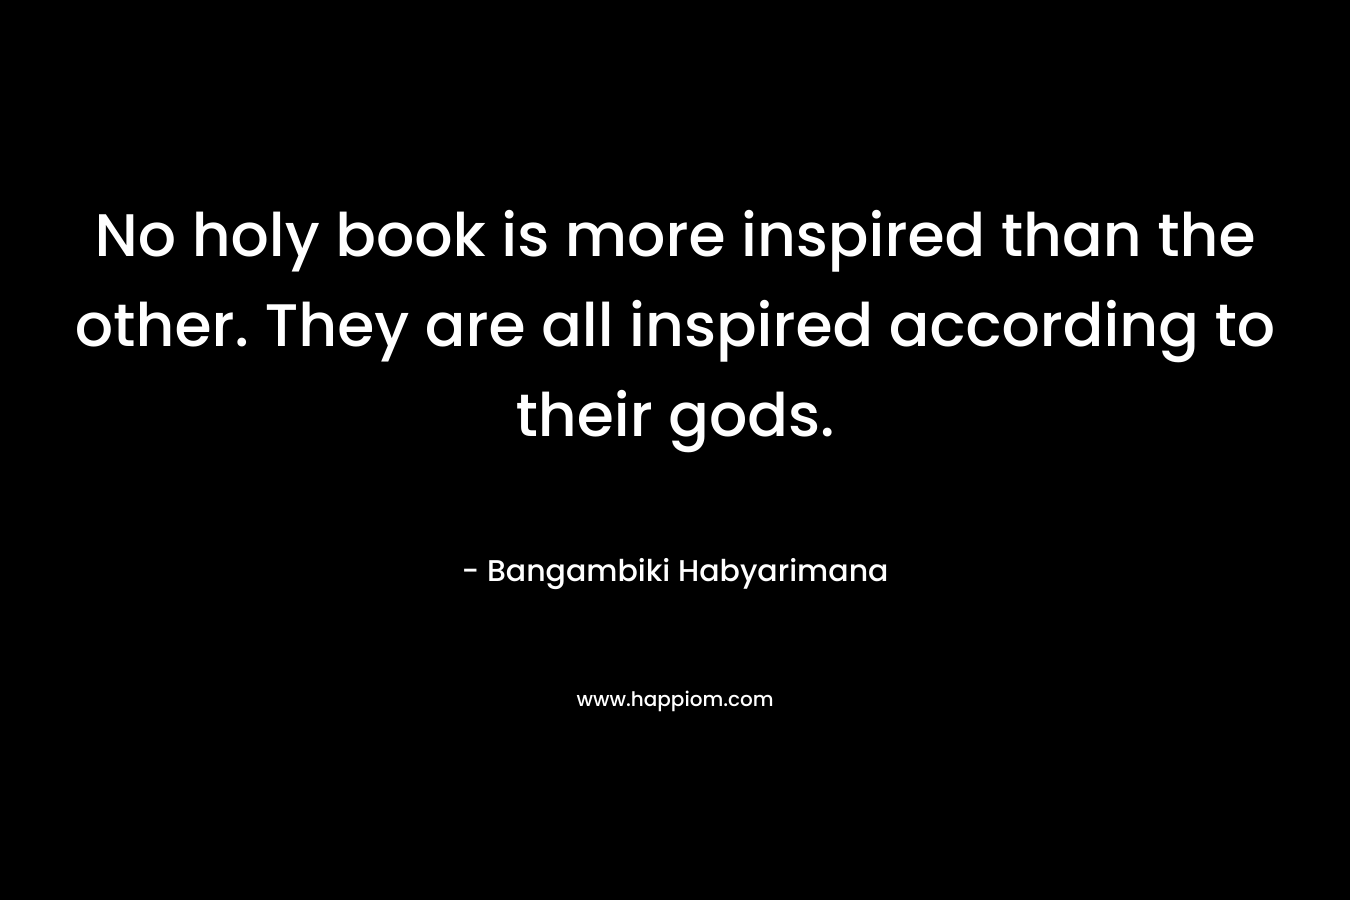 No holy book is more inspired than the other. They are all inspired according to their gods.